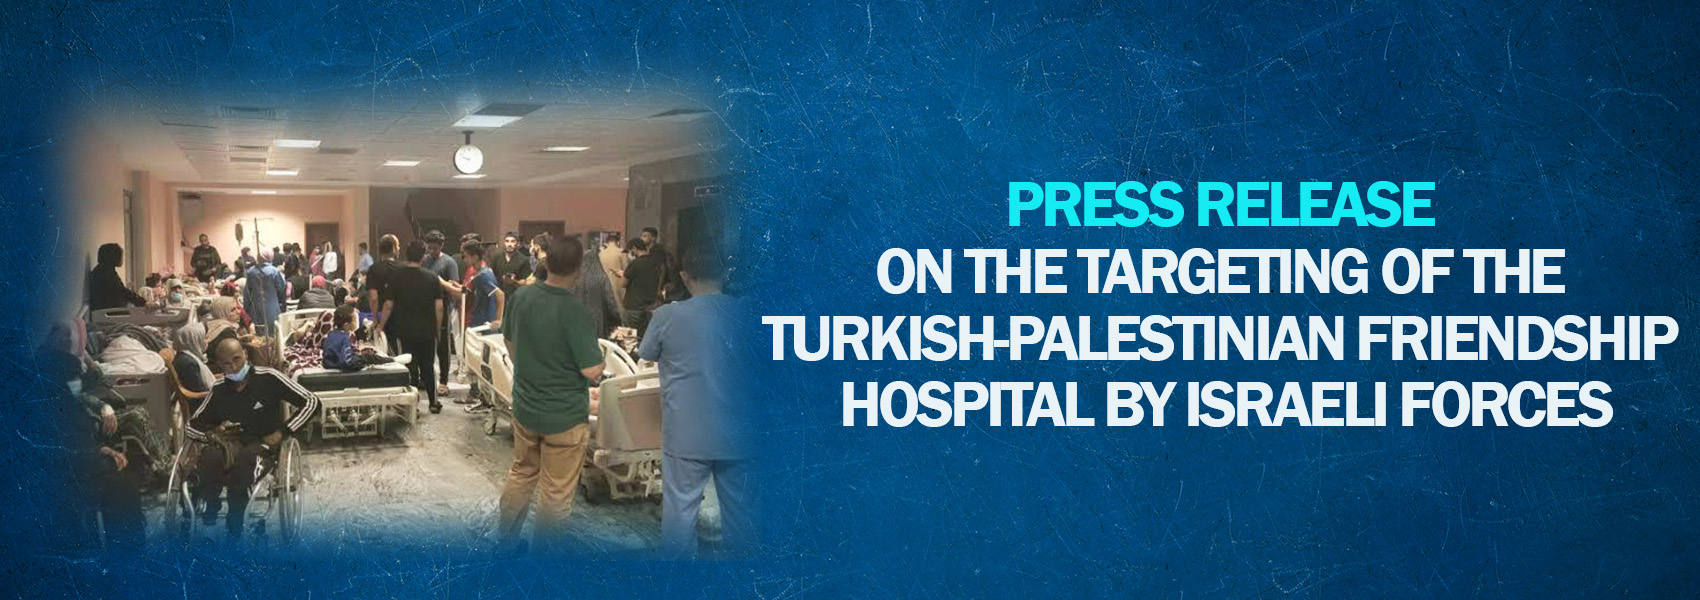 Press Release  on the Targeting of the Turkish-Palestinian Friendship Hospital by Israeli Forces